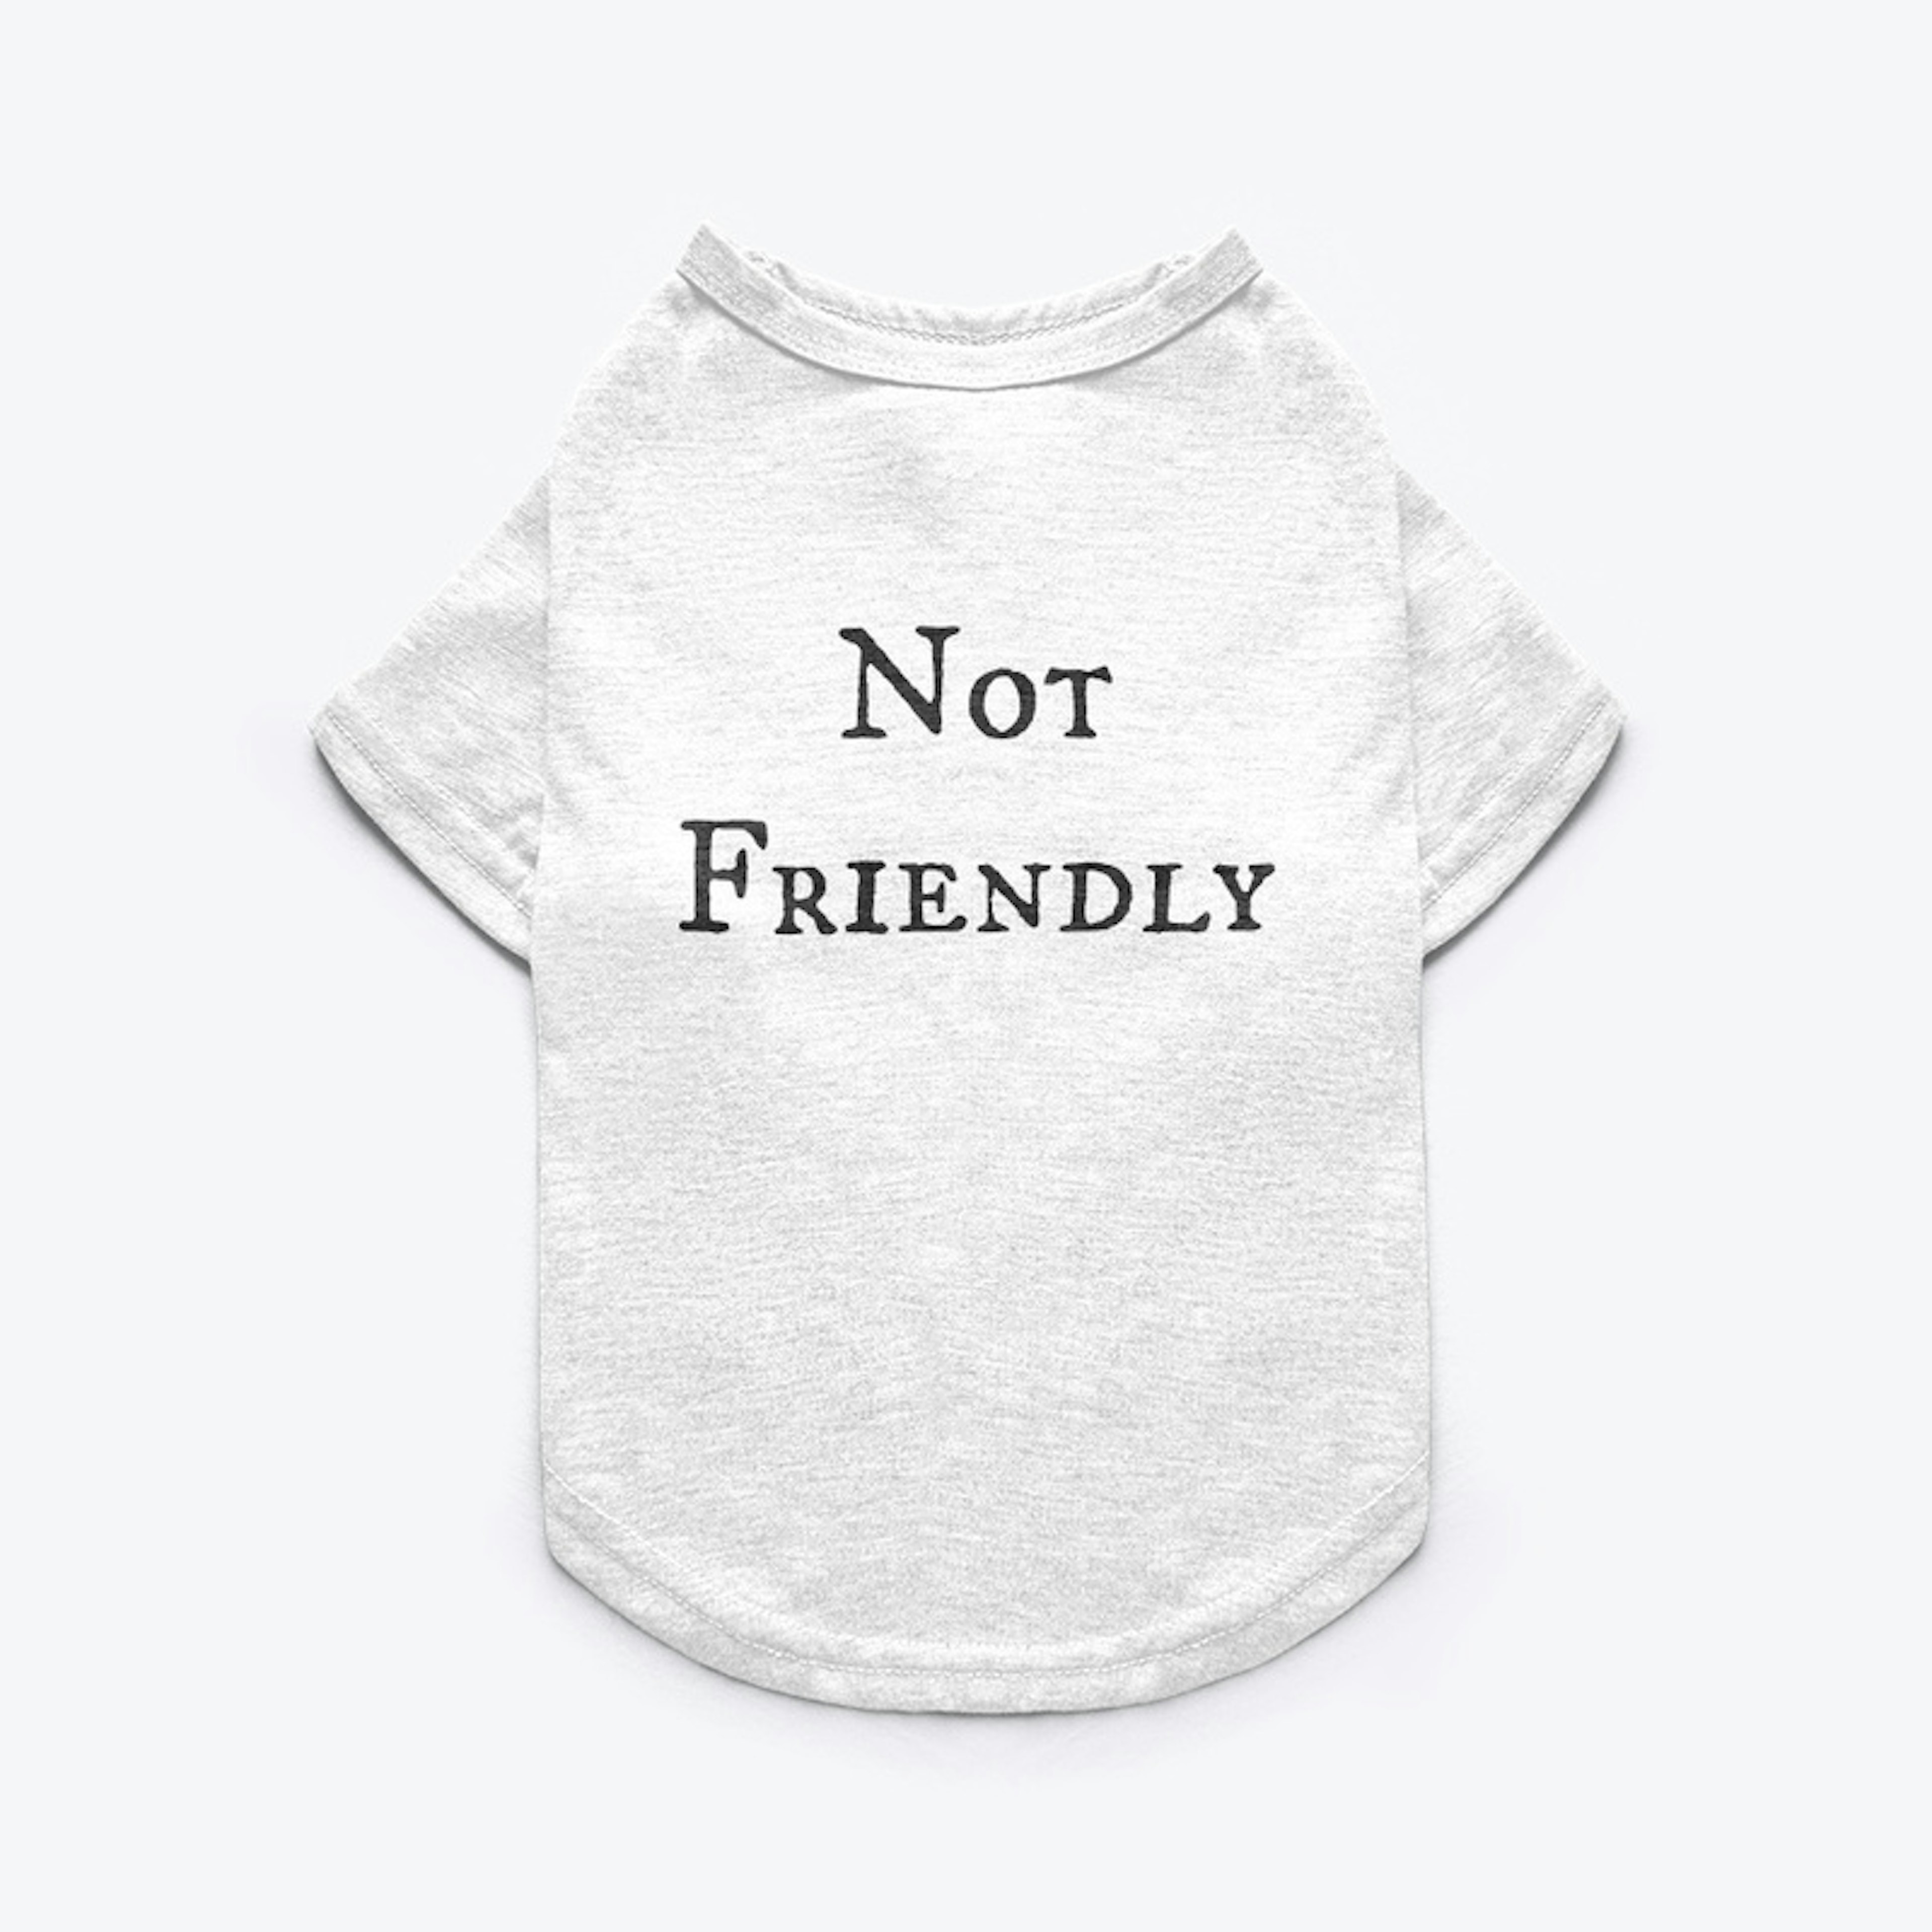 Not Friendly shirts for the whole family